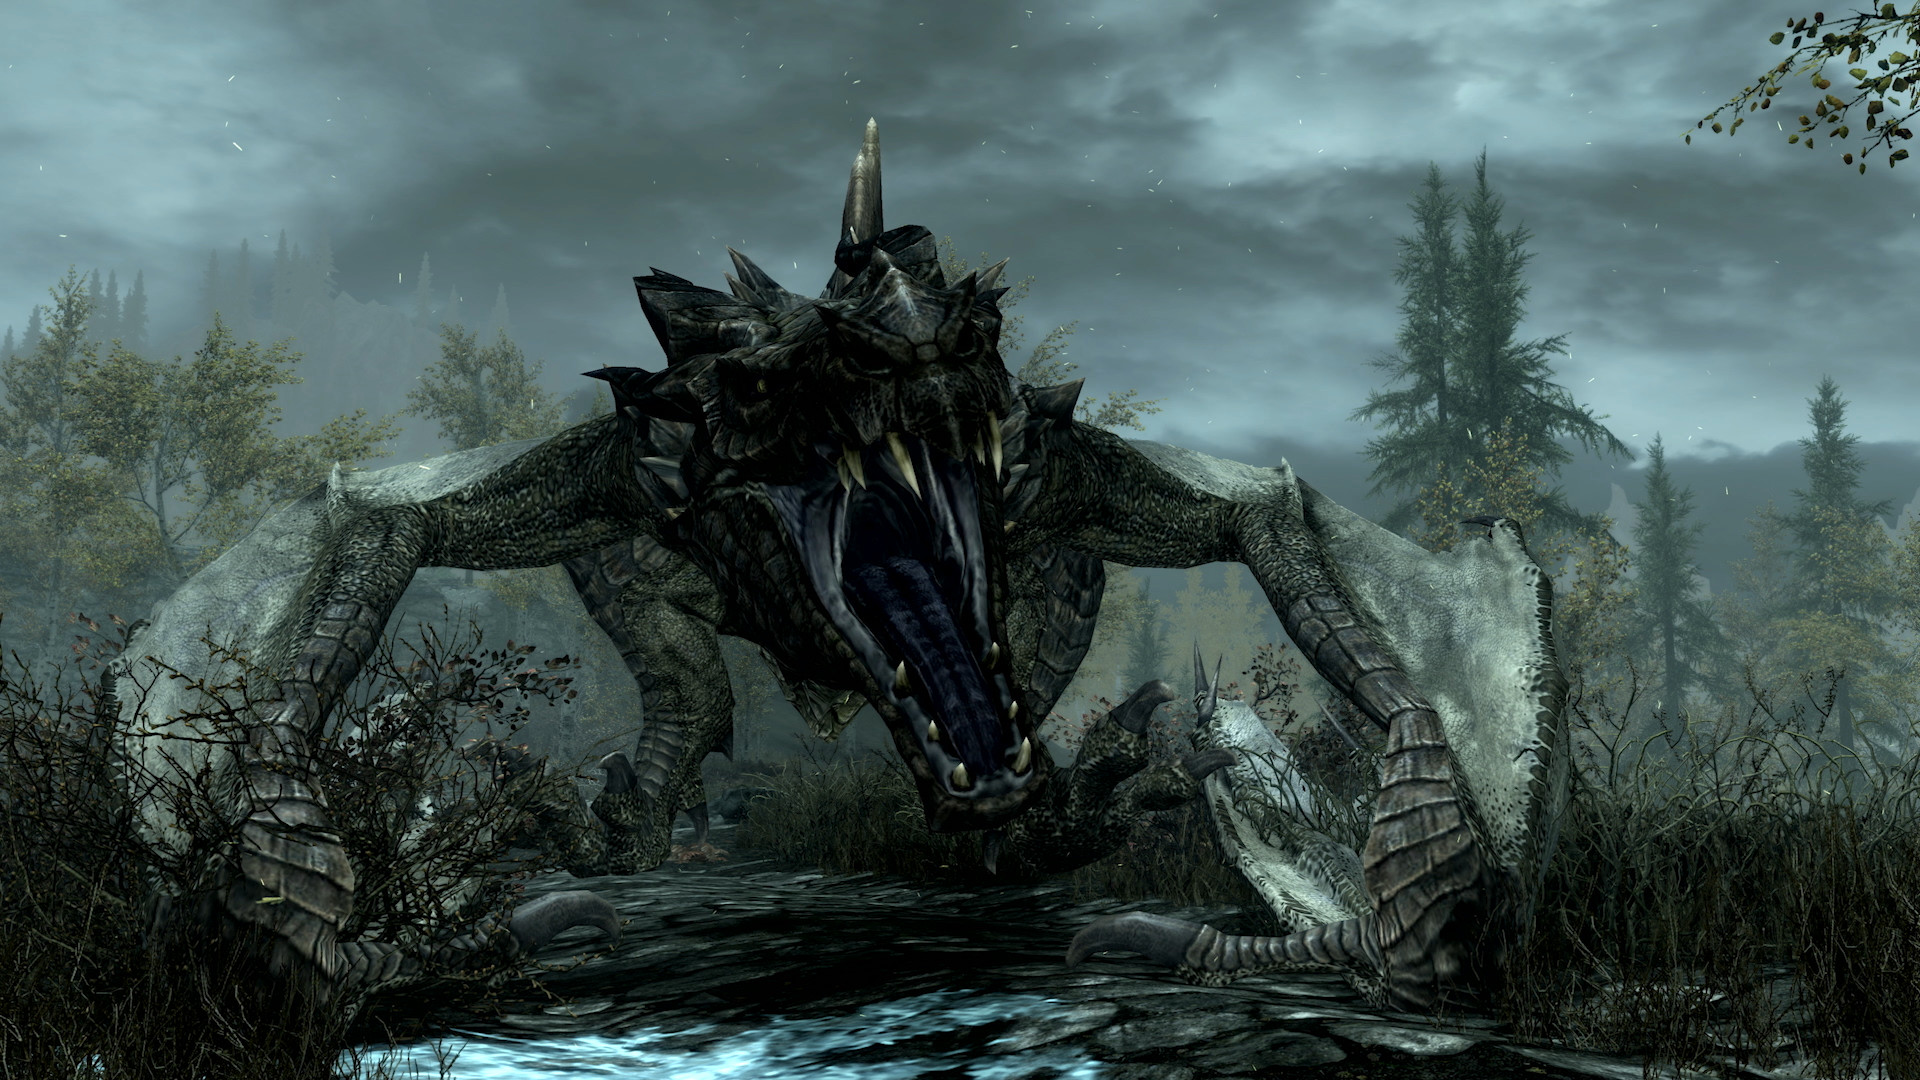 Skyrim Anniversary Edition has once again been rated for Switch